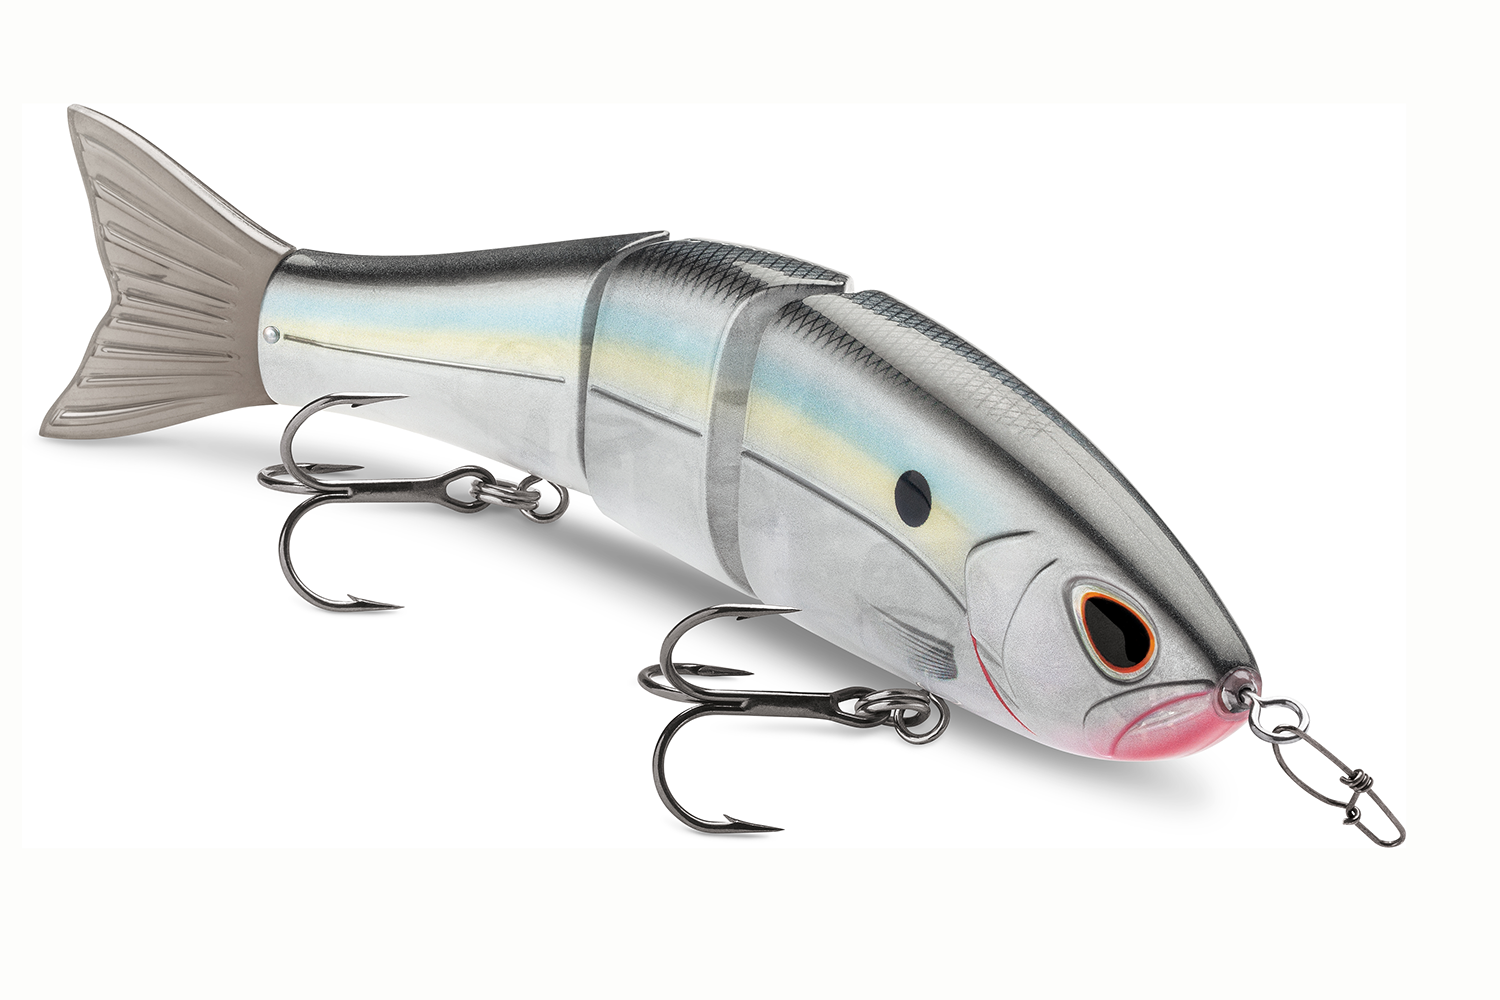 <p><b>Storm Arashi Swimmer</b></p>
<p>The Arashi Swimmer is a multi-jointed bait that delivers a life-like swimming action over a wide range of retrieve speeds. It has a moderate sink rate (ROF-8, .8ft/sec) that creates a stable action at faster retrieve speeds while still allowing the lure to remain in the strike zone when paused or twitched. Swiveling hooks increase catch ratio by eliminating leverage against the lure body. Weighs 2 3/16 oz, 7 inches, a pair of VMC 1/0 trebles and comes in 9 colors. </p>
<p><a href=